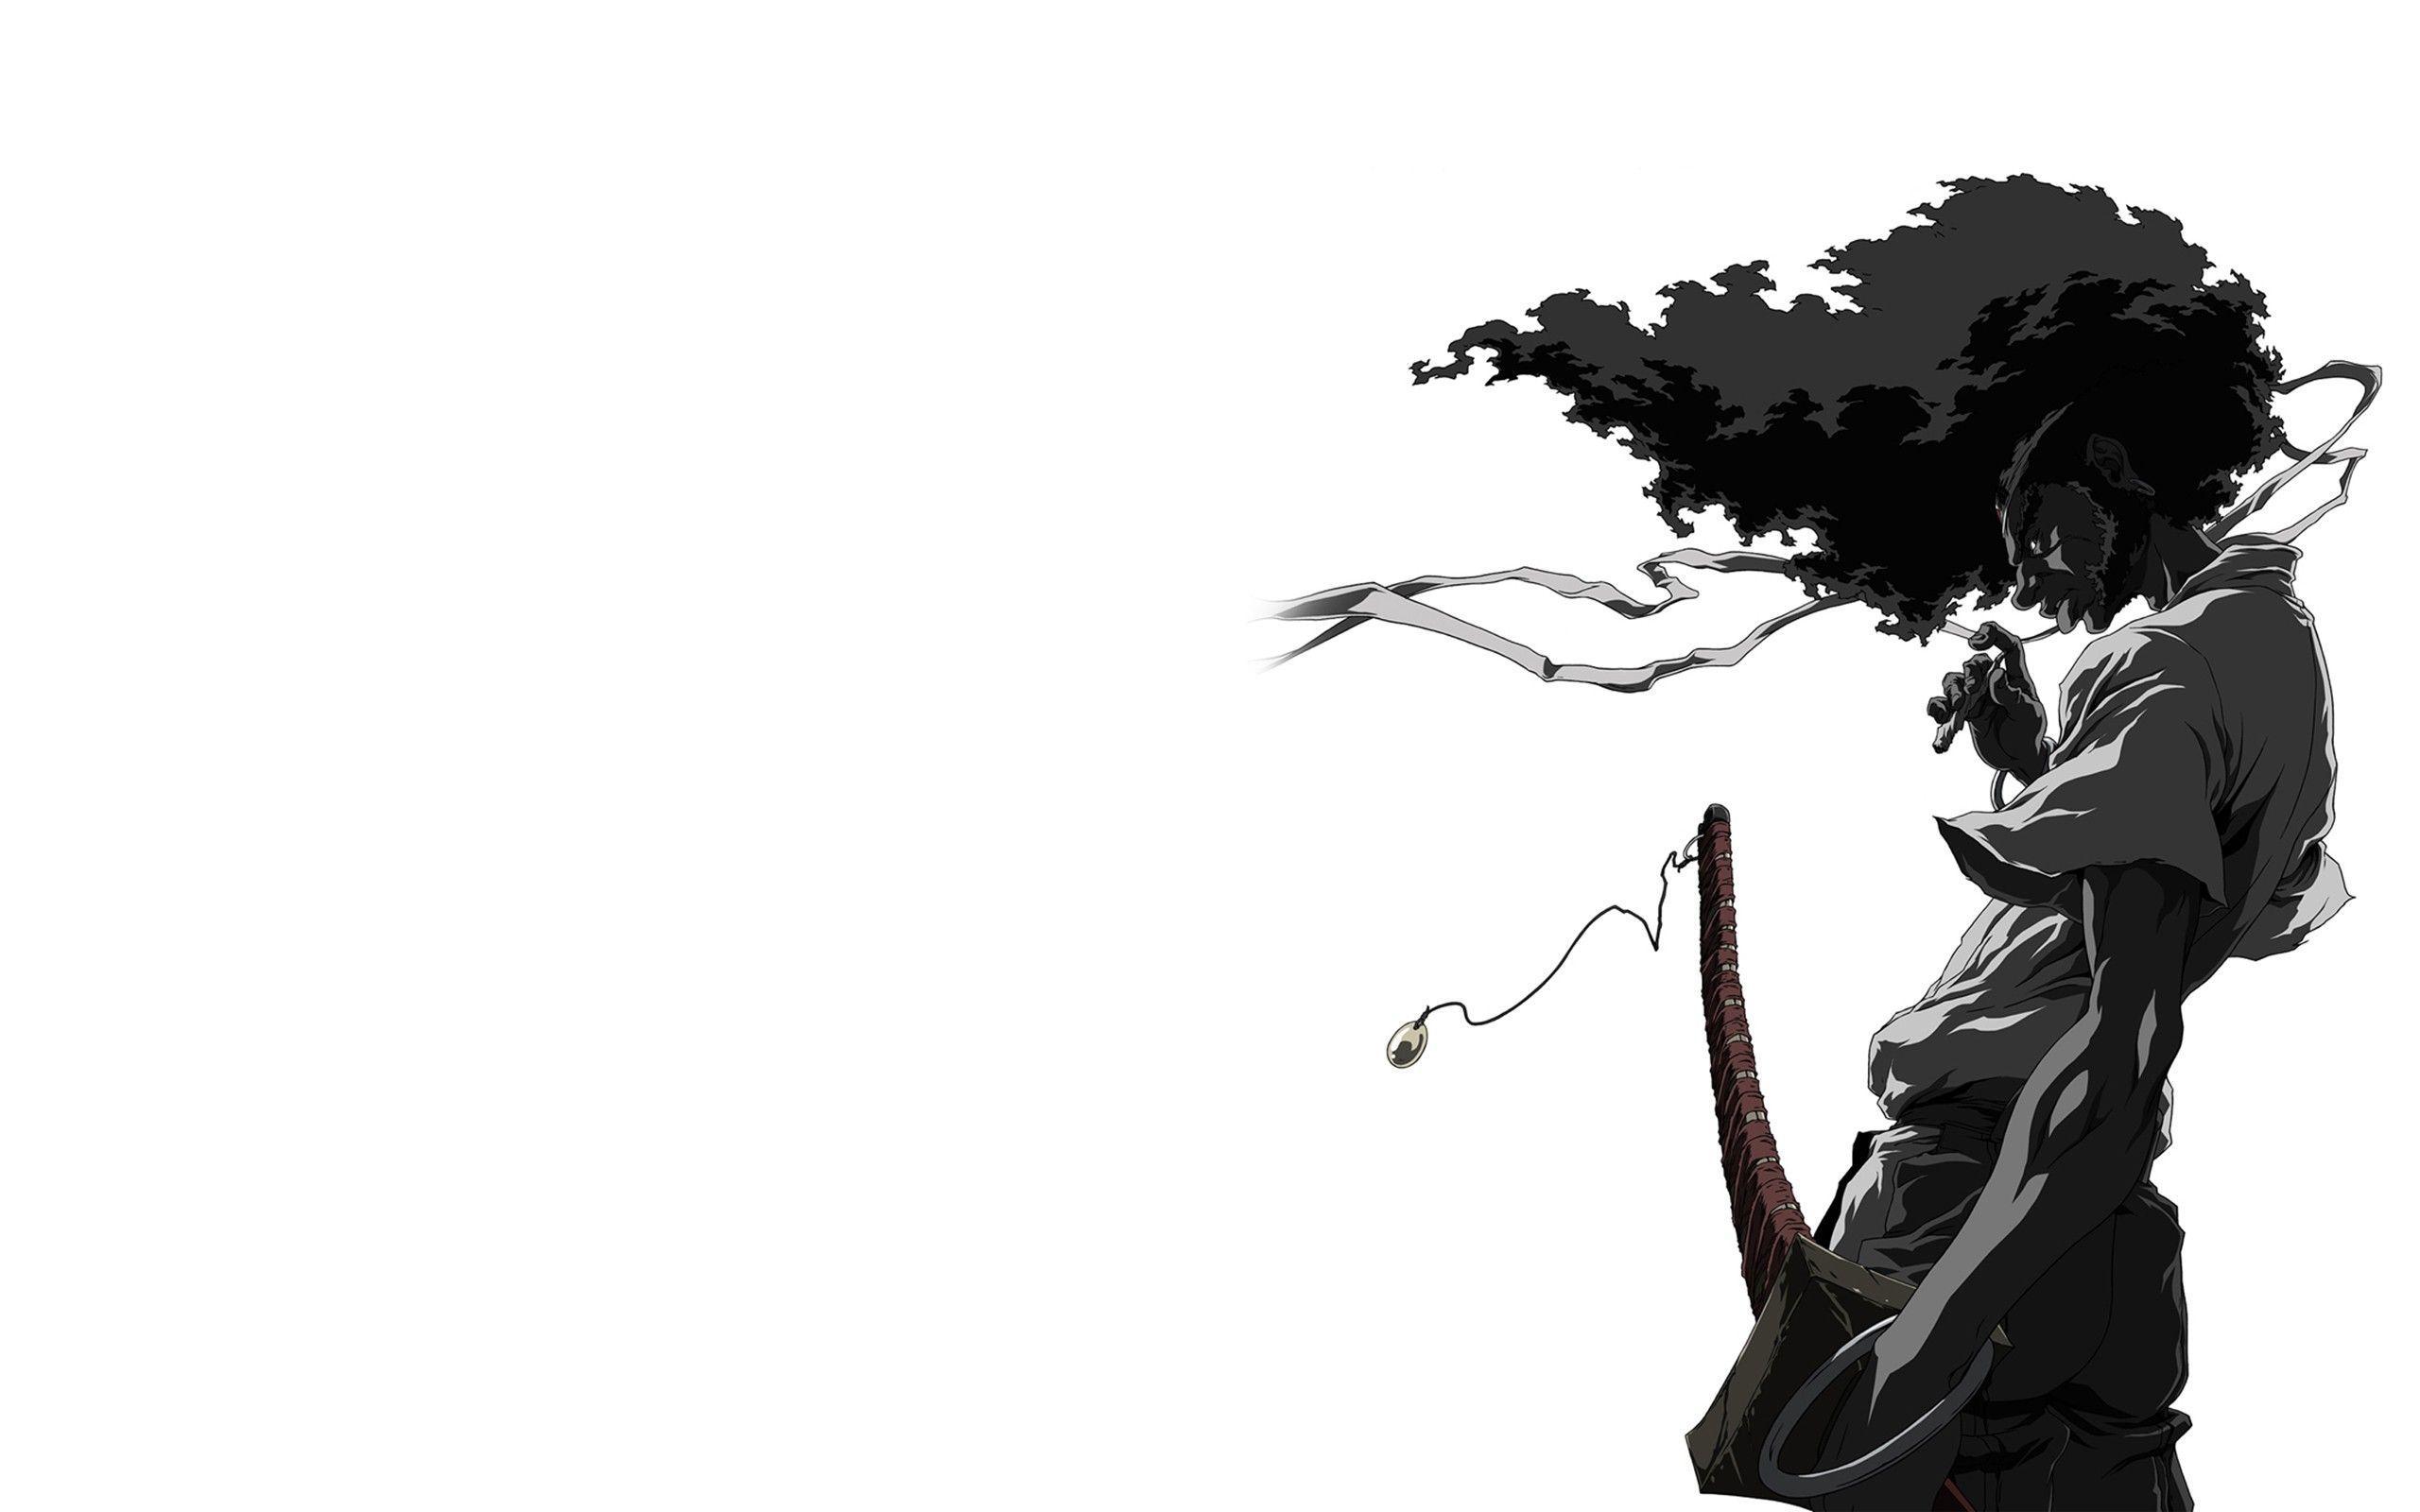 Anime Wallpaper Hd Black And White : Anime PC Black HD Wallpapers